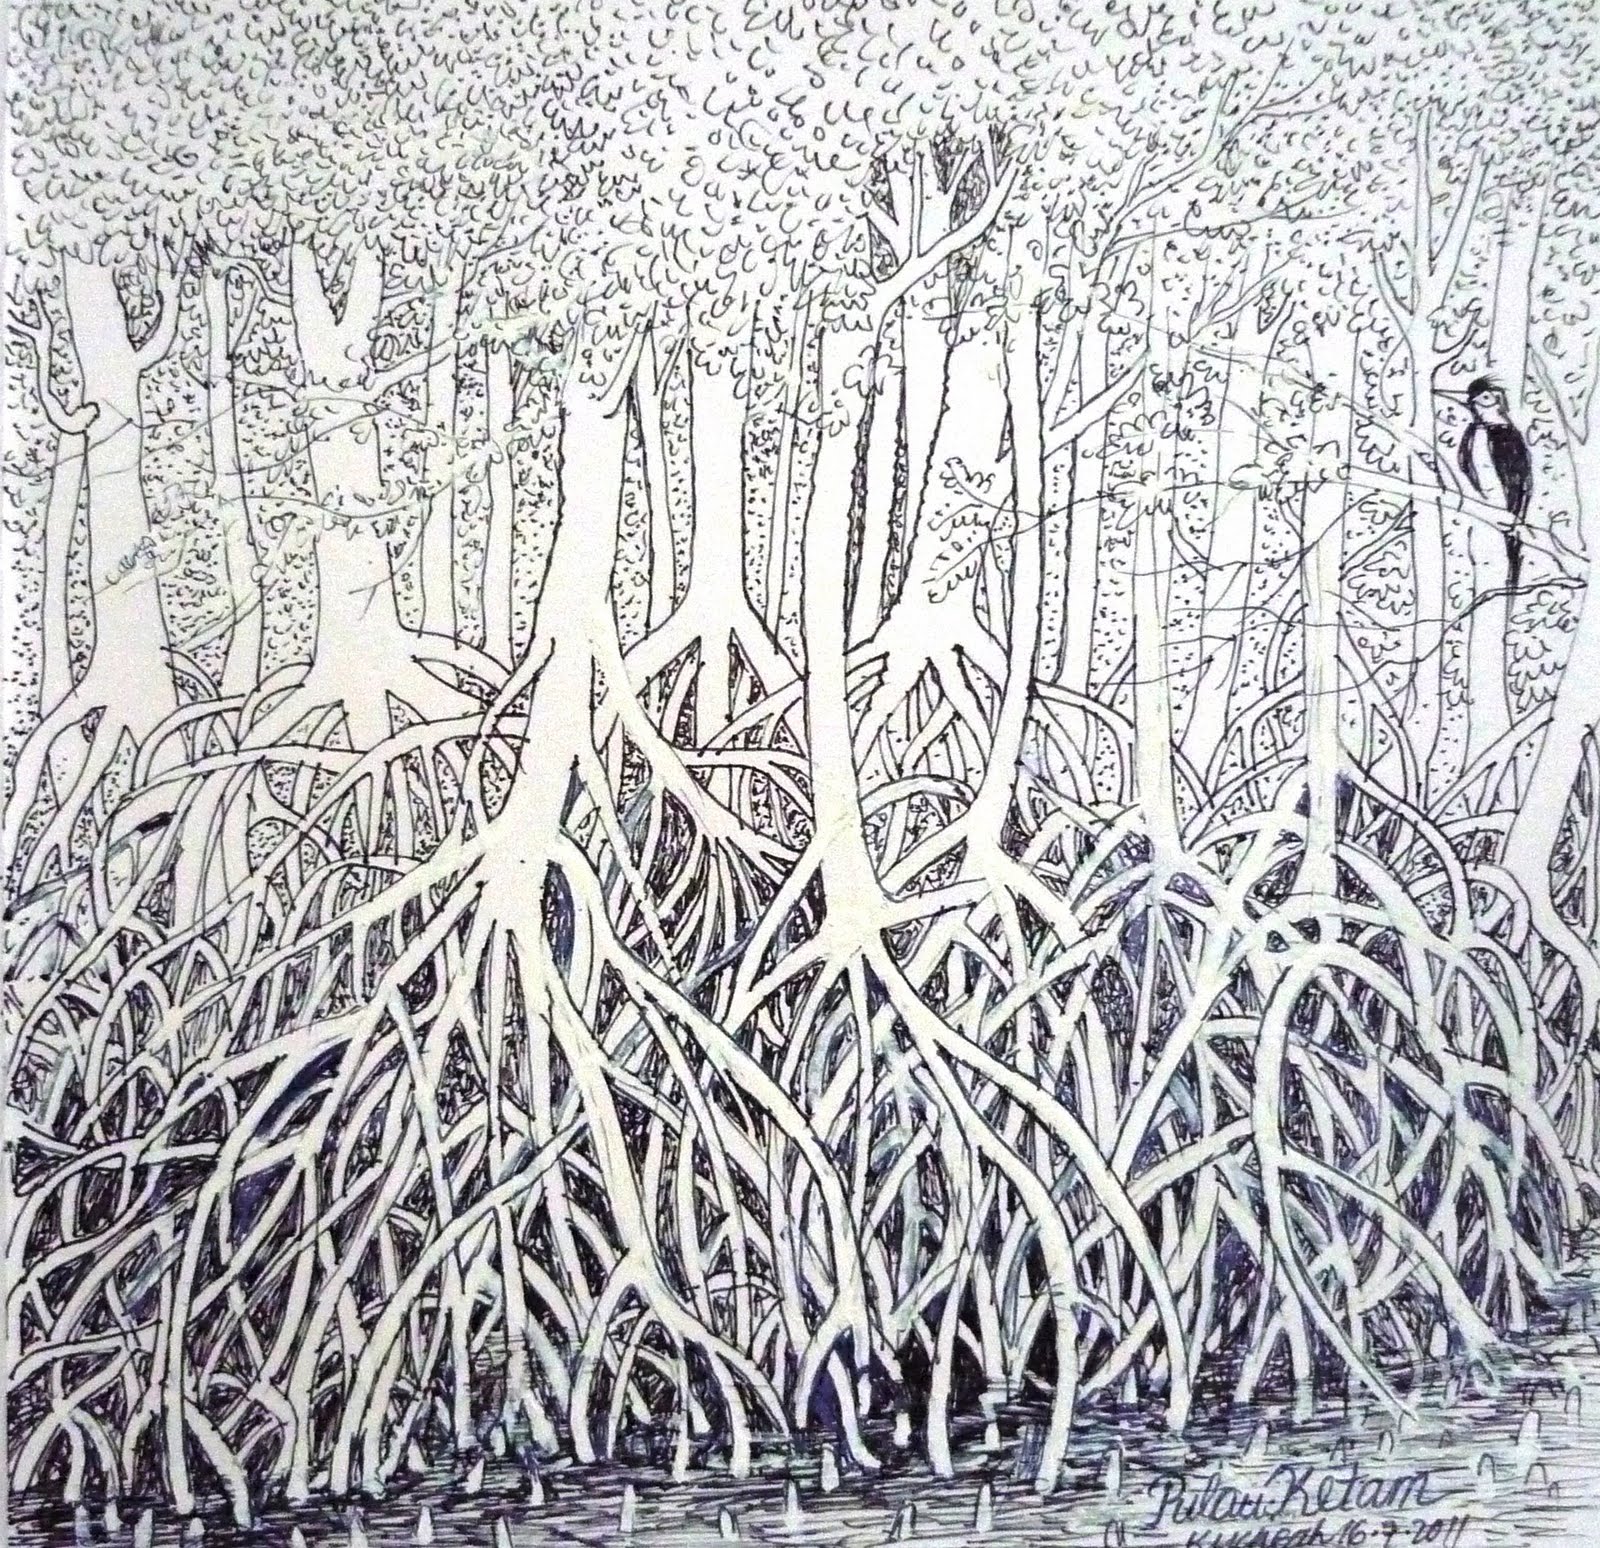 Mangrove Sketch at Explore collection of Mangrove